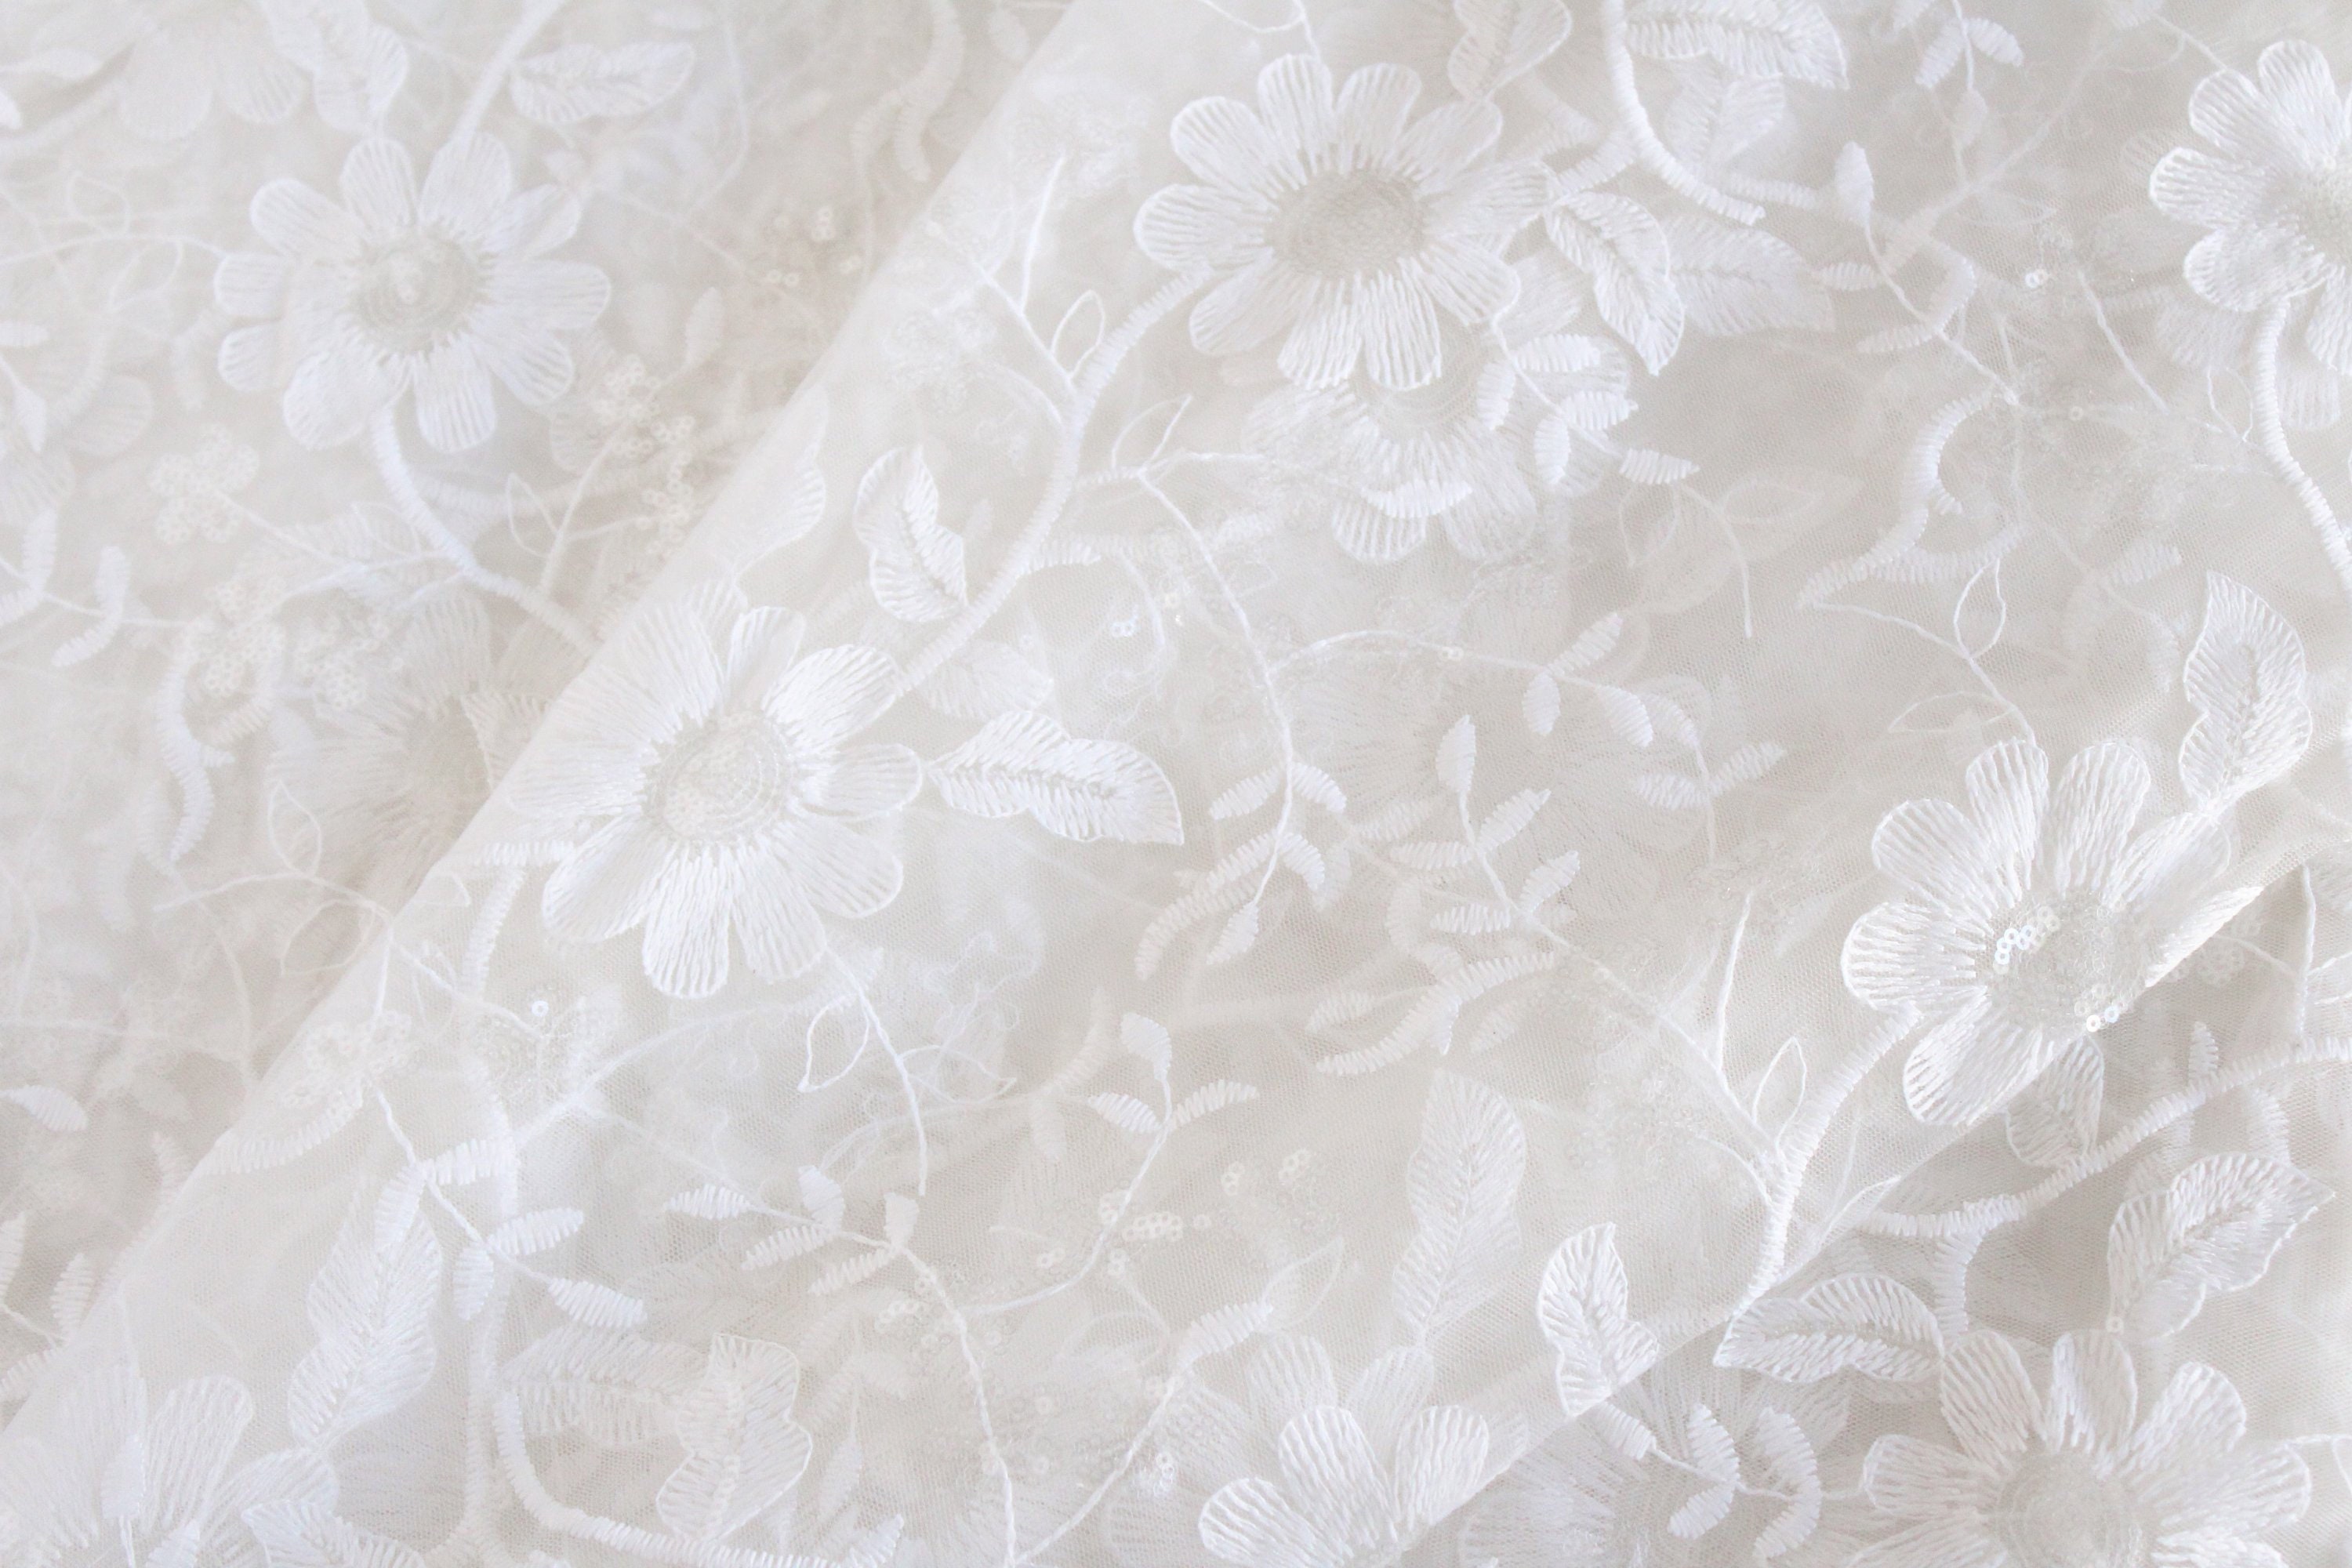 Off-white Net Fabric With White Embroidery, Boho Floral Fabric, Embroidered Net  Fabric, Wedding Dress Fabric, Sequin Fabric 1 Yard 